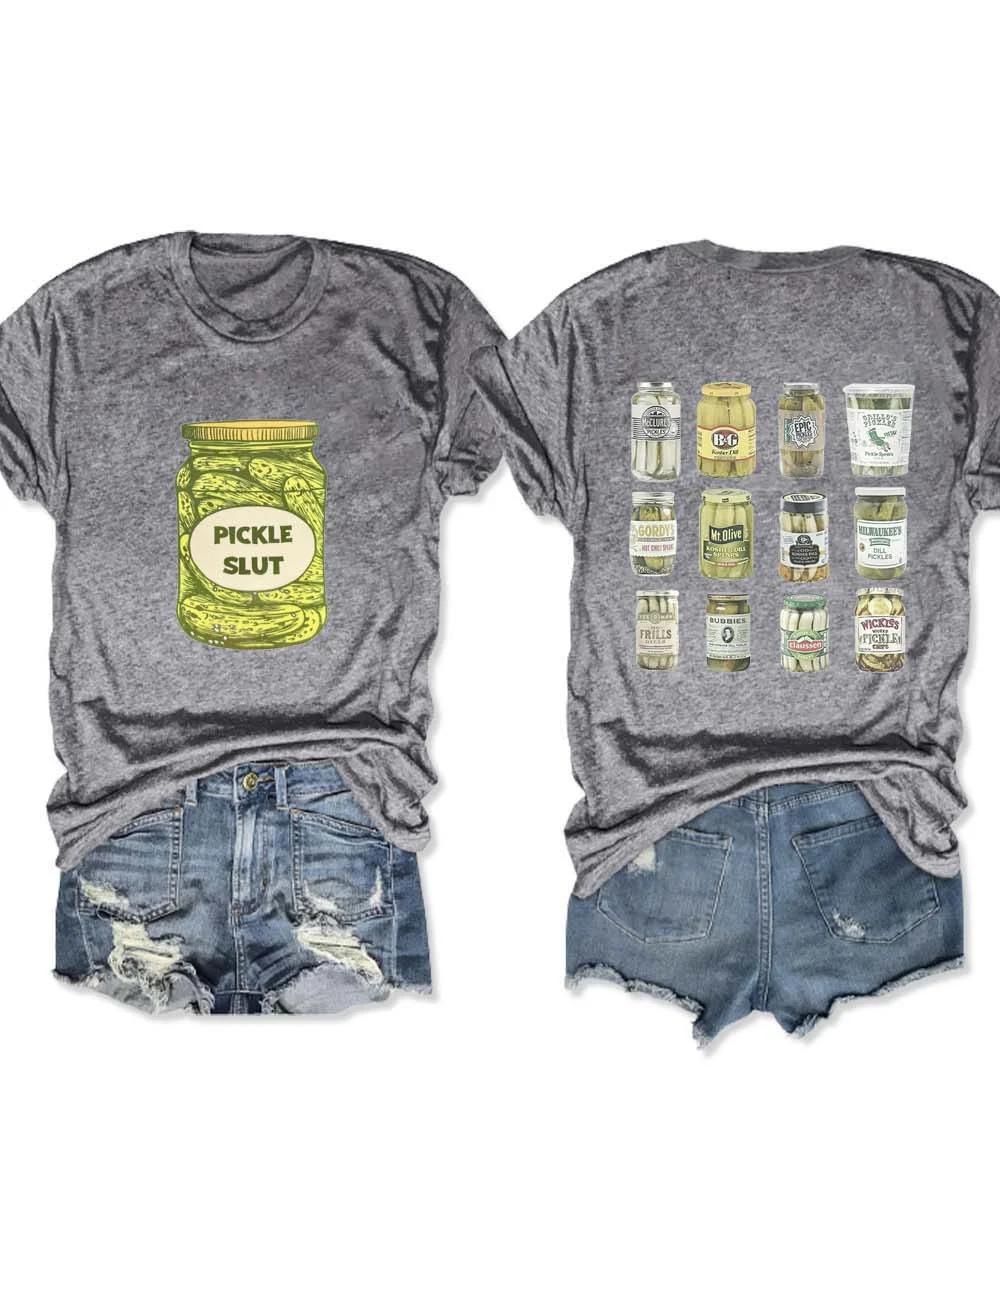 Canned Pickles T-shirt